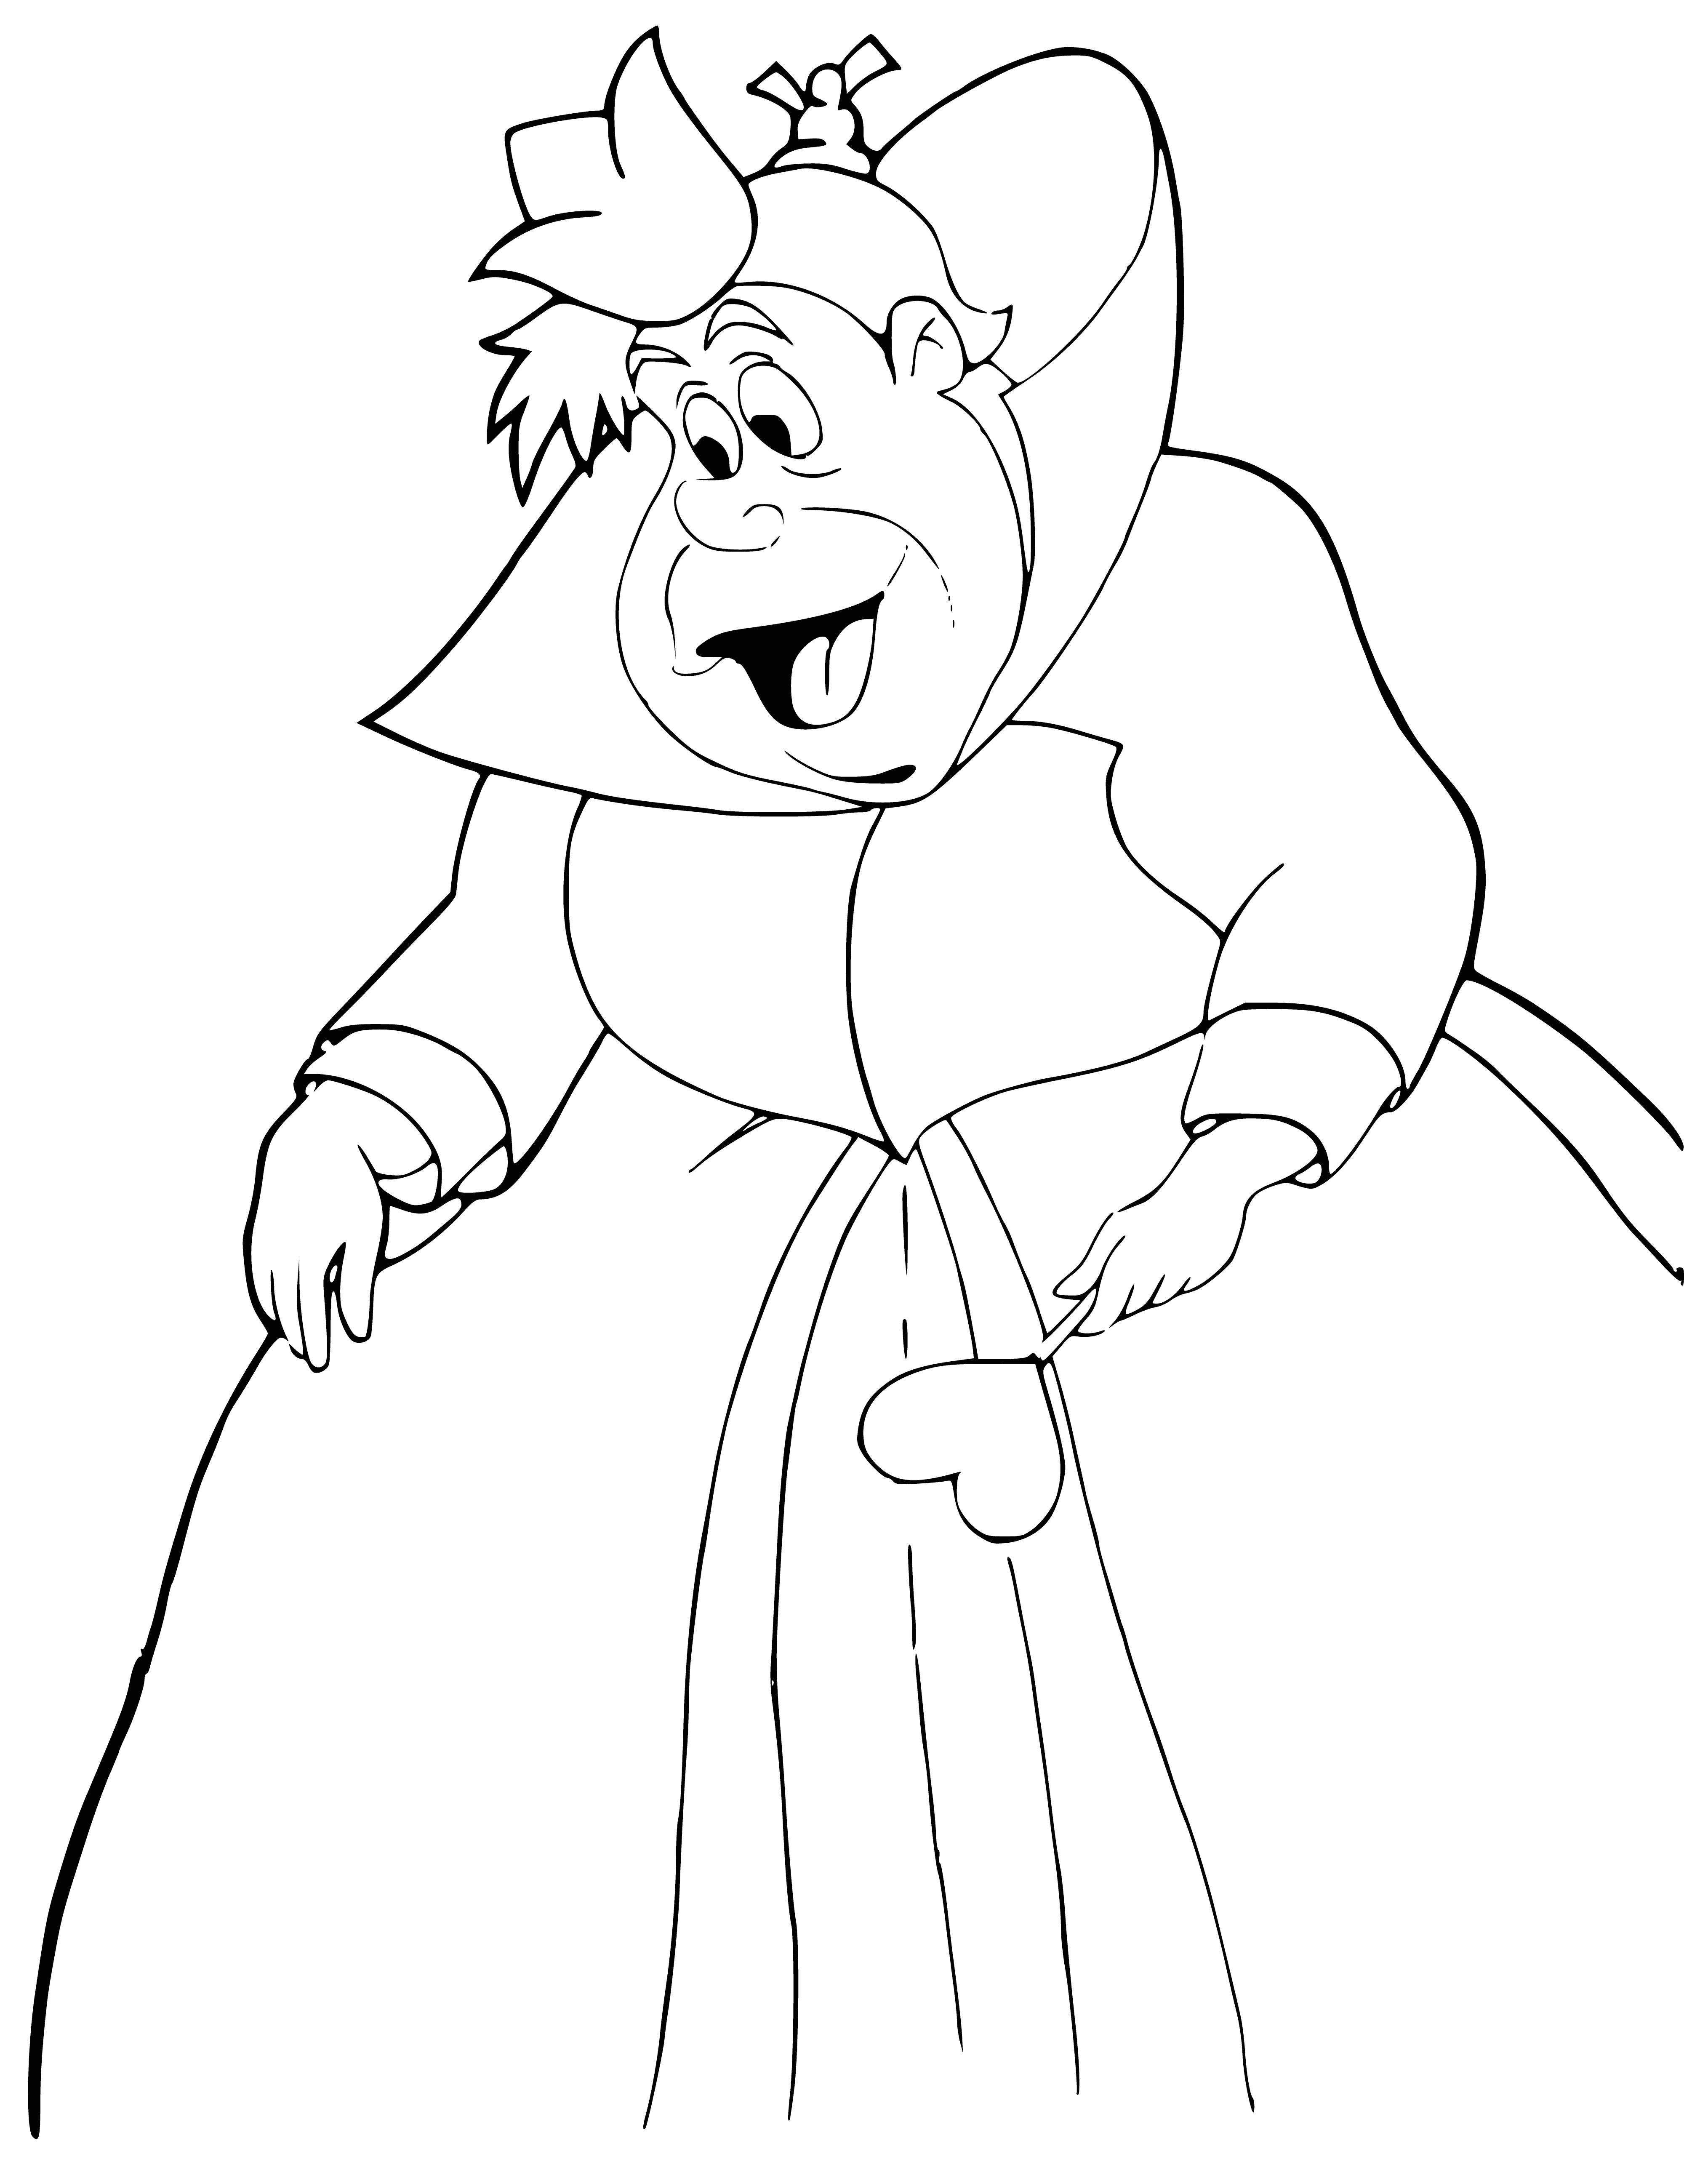 coloring page: Large, overweight woman with wide-open eyes, open-mouthed smile, wearing crown and long dress, sitting on a throne.